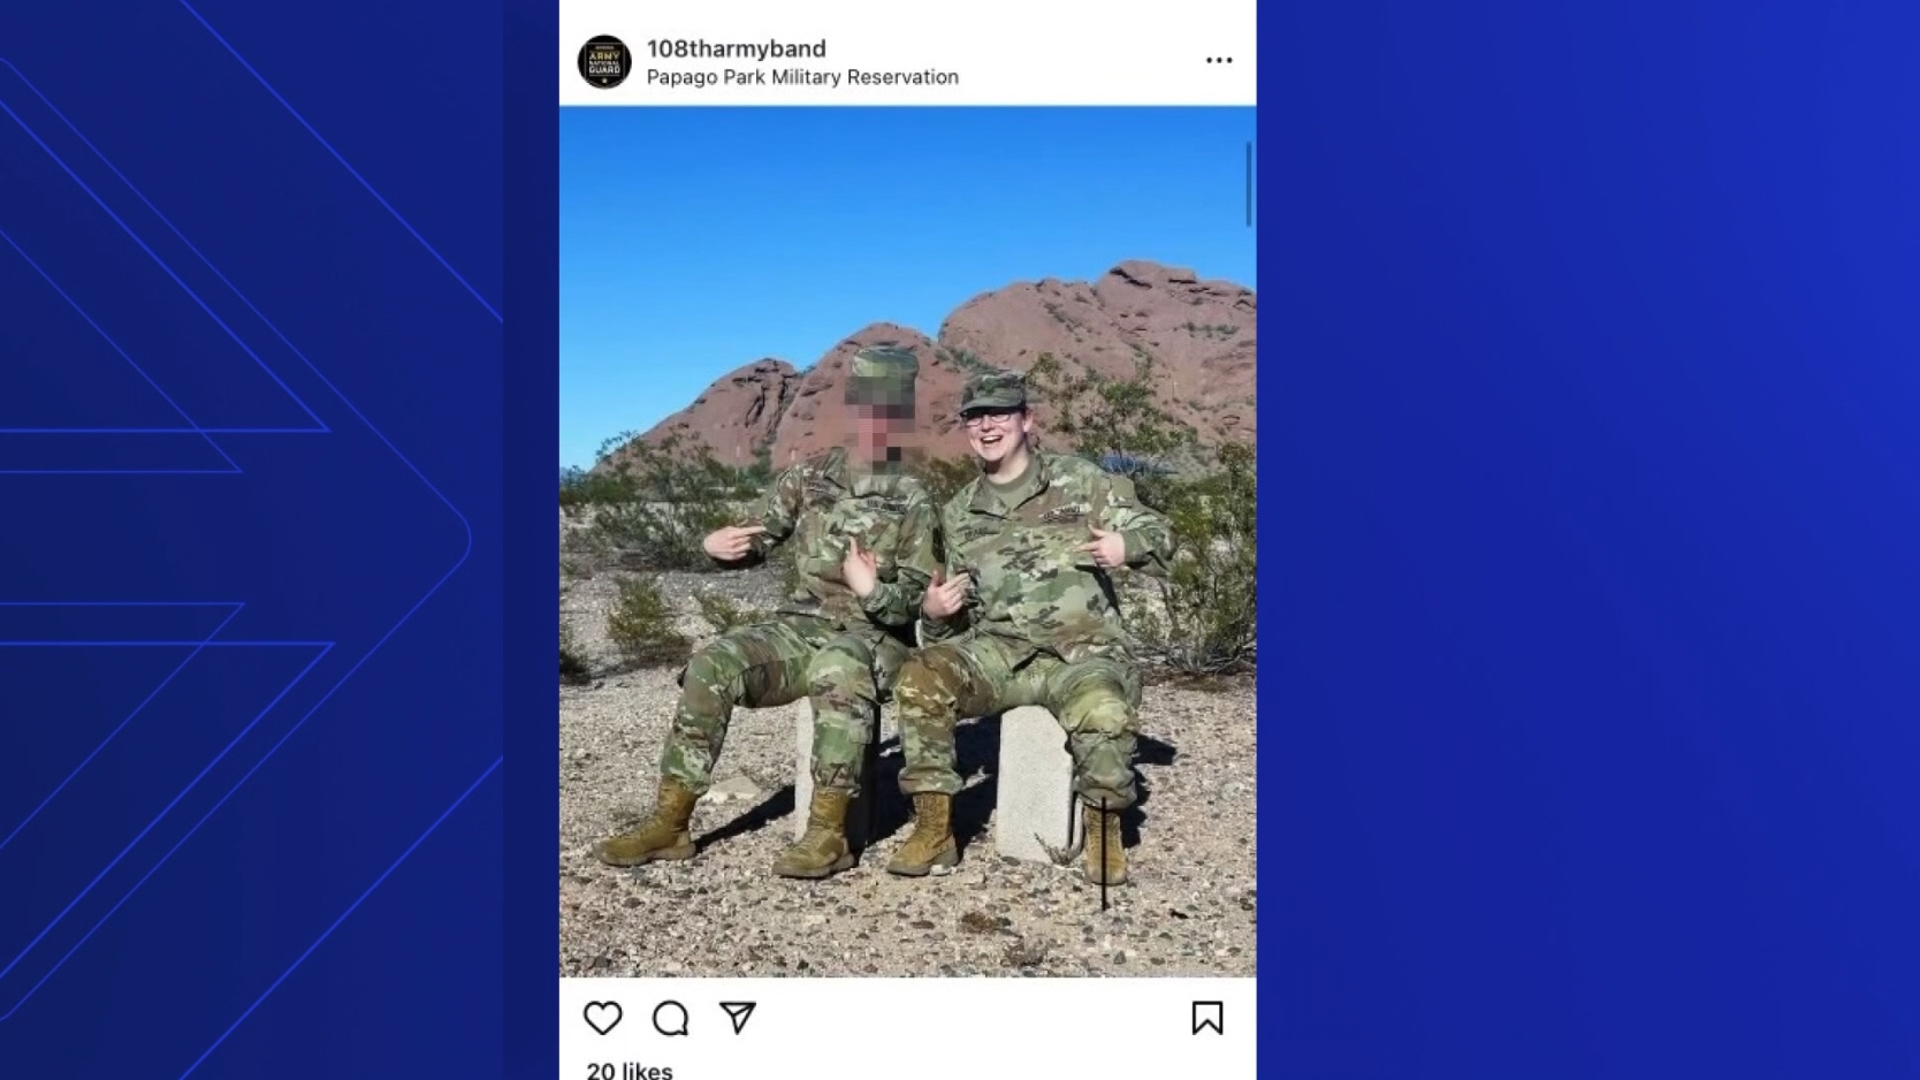 The National Guard is investigating the allegations regarding Ashley Drago and said "Extremism has no place in the military."